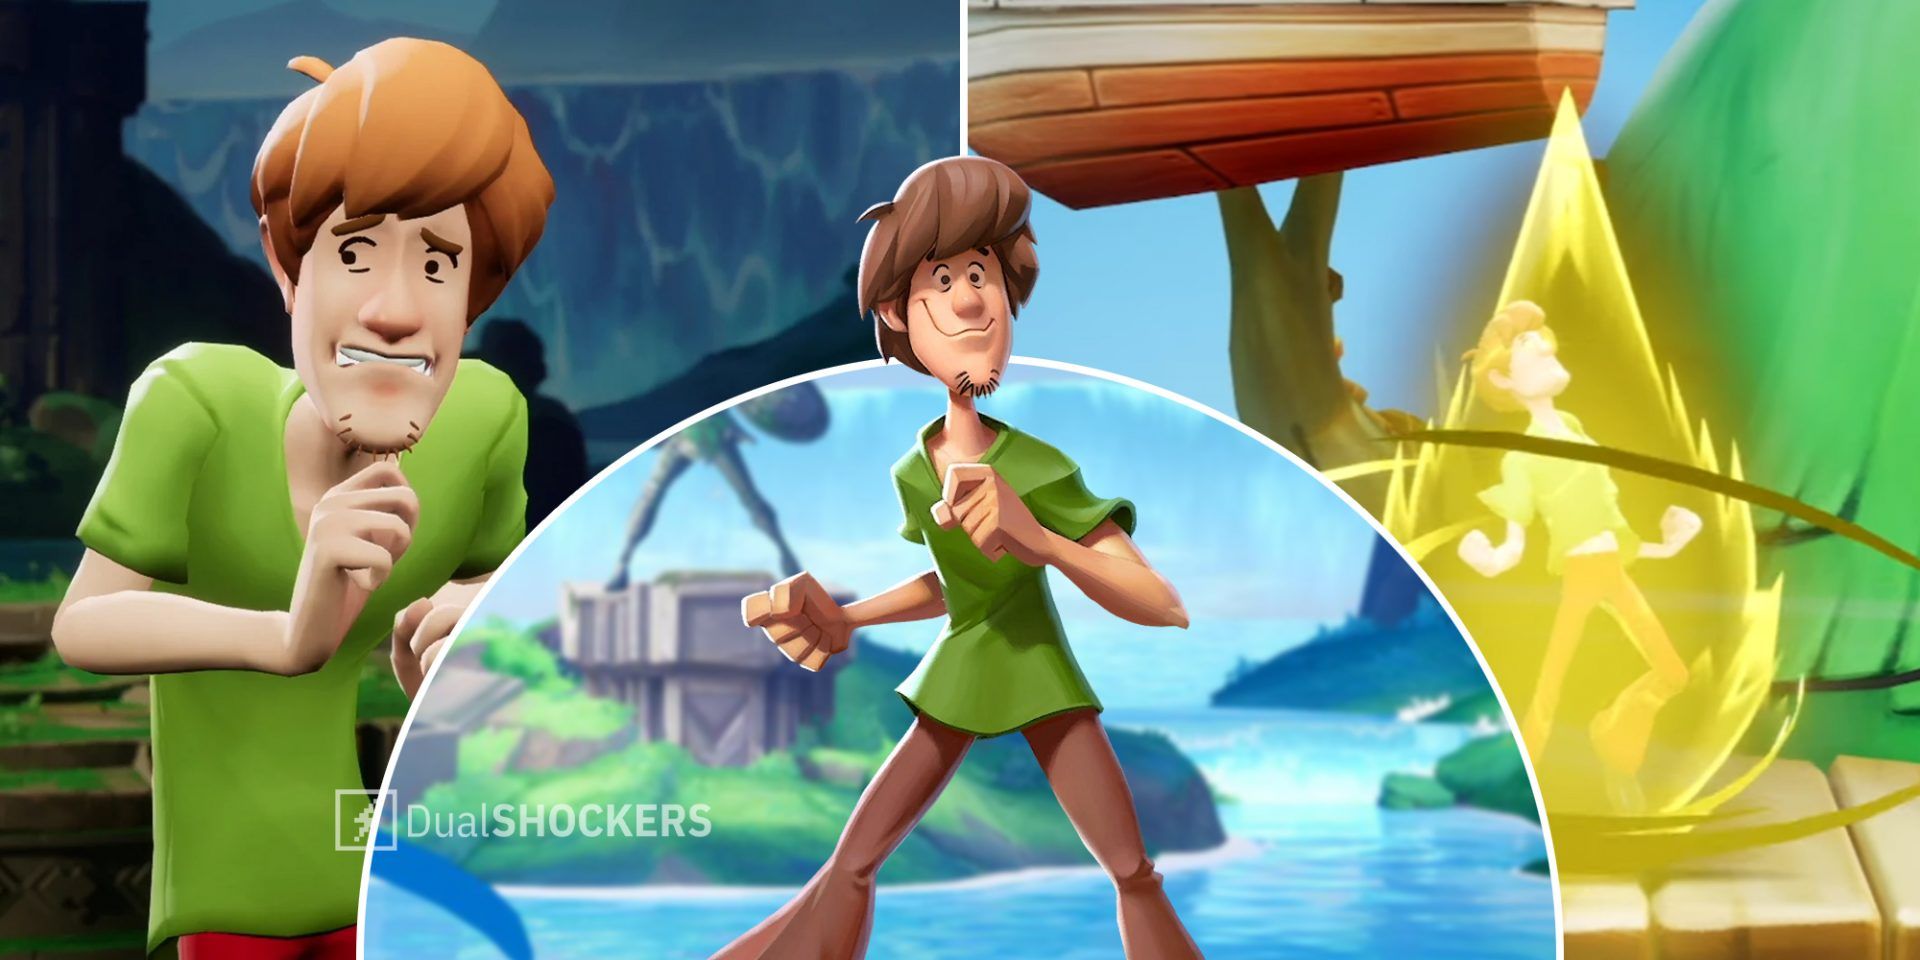 MultiVersus Shaggy scared on left, Shaggy promo image in middle, Shaggy Ultra Instinct on right